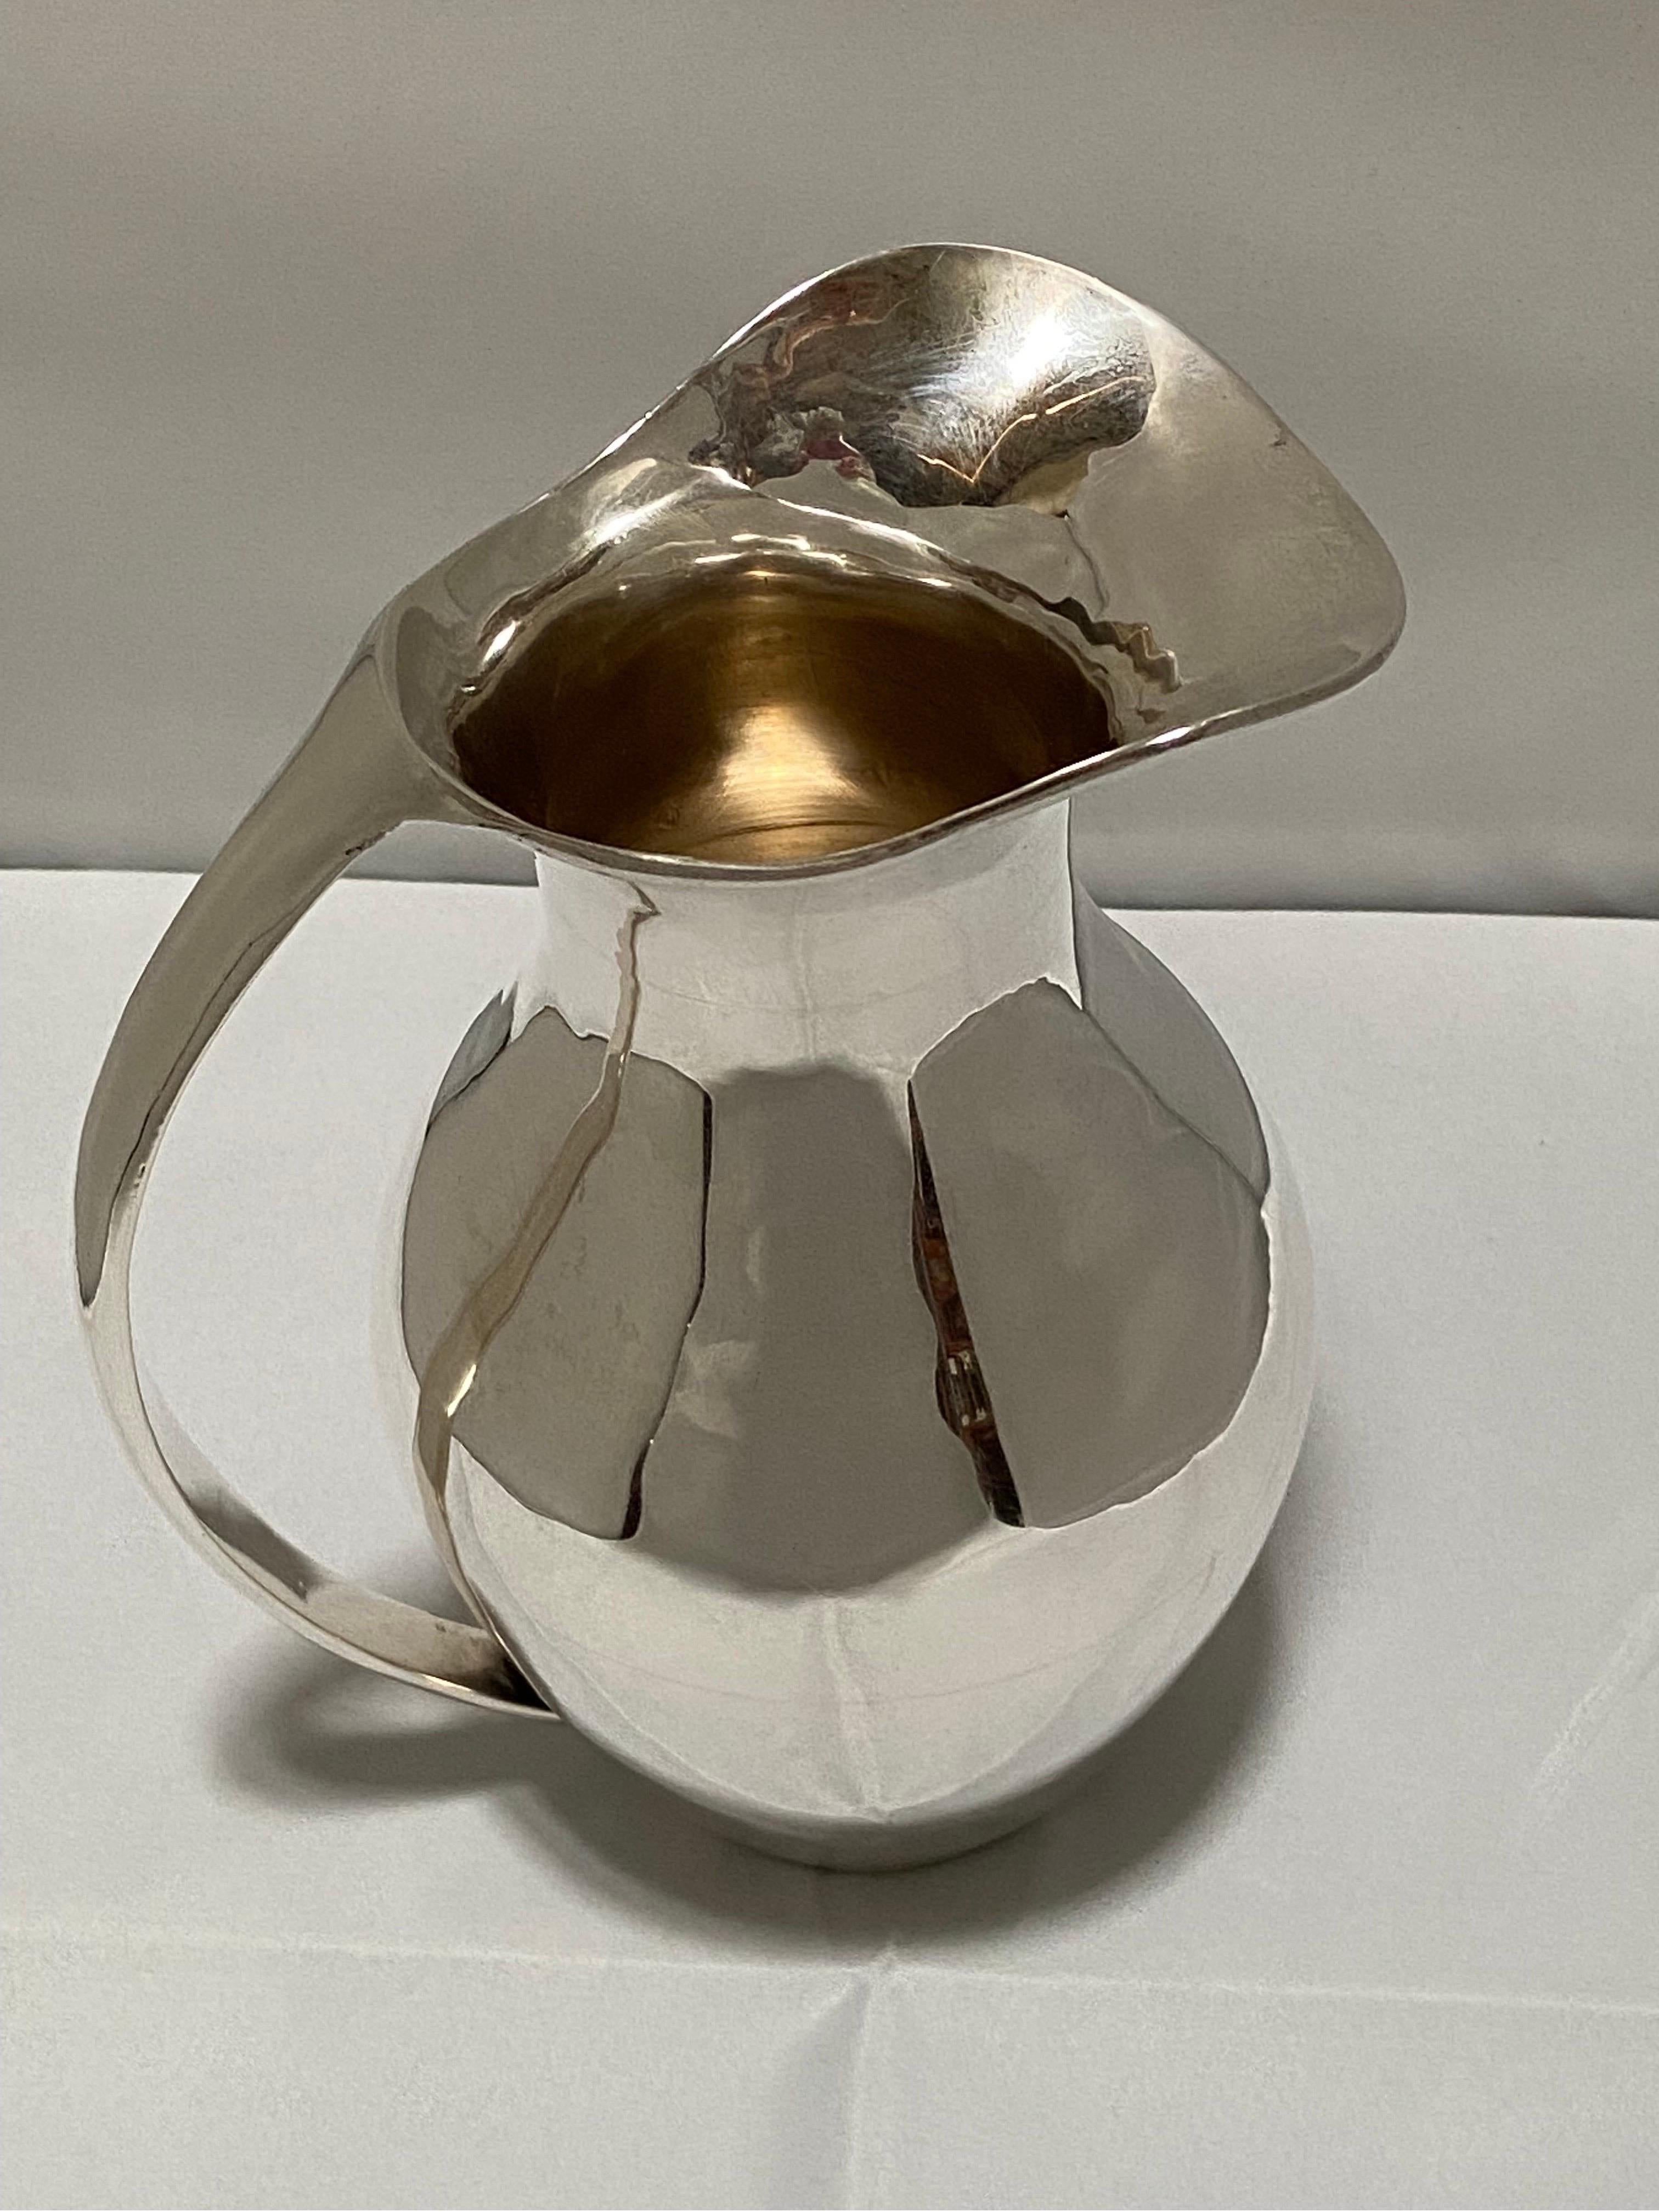 A vintage, Mid-Century Modern Mexican sterling silver pitcher by the maker, C. Zurita. With a nod to the eponymous design firm of Georg Jensen, this sterling silver ewer has a gorgeous modernist style with flowing lines and wonderful scale. Marked